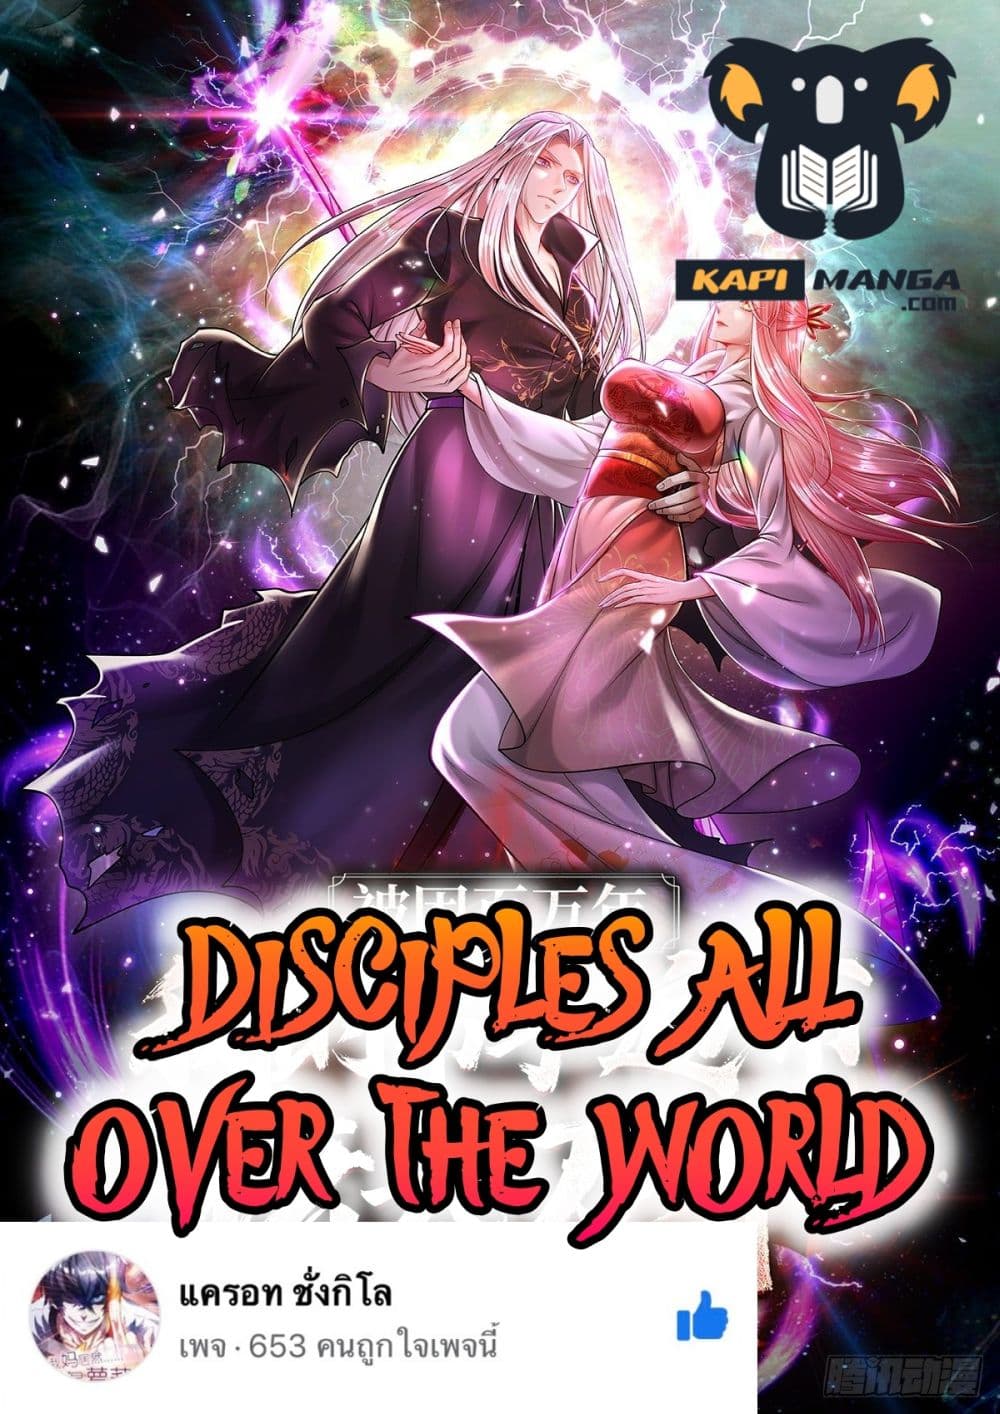 Disciples All Over the World à¸à¸­à¸à¸à¸µà¹ 70 (1)